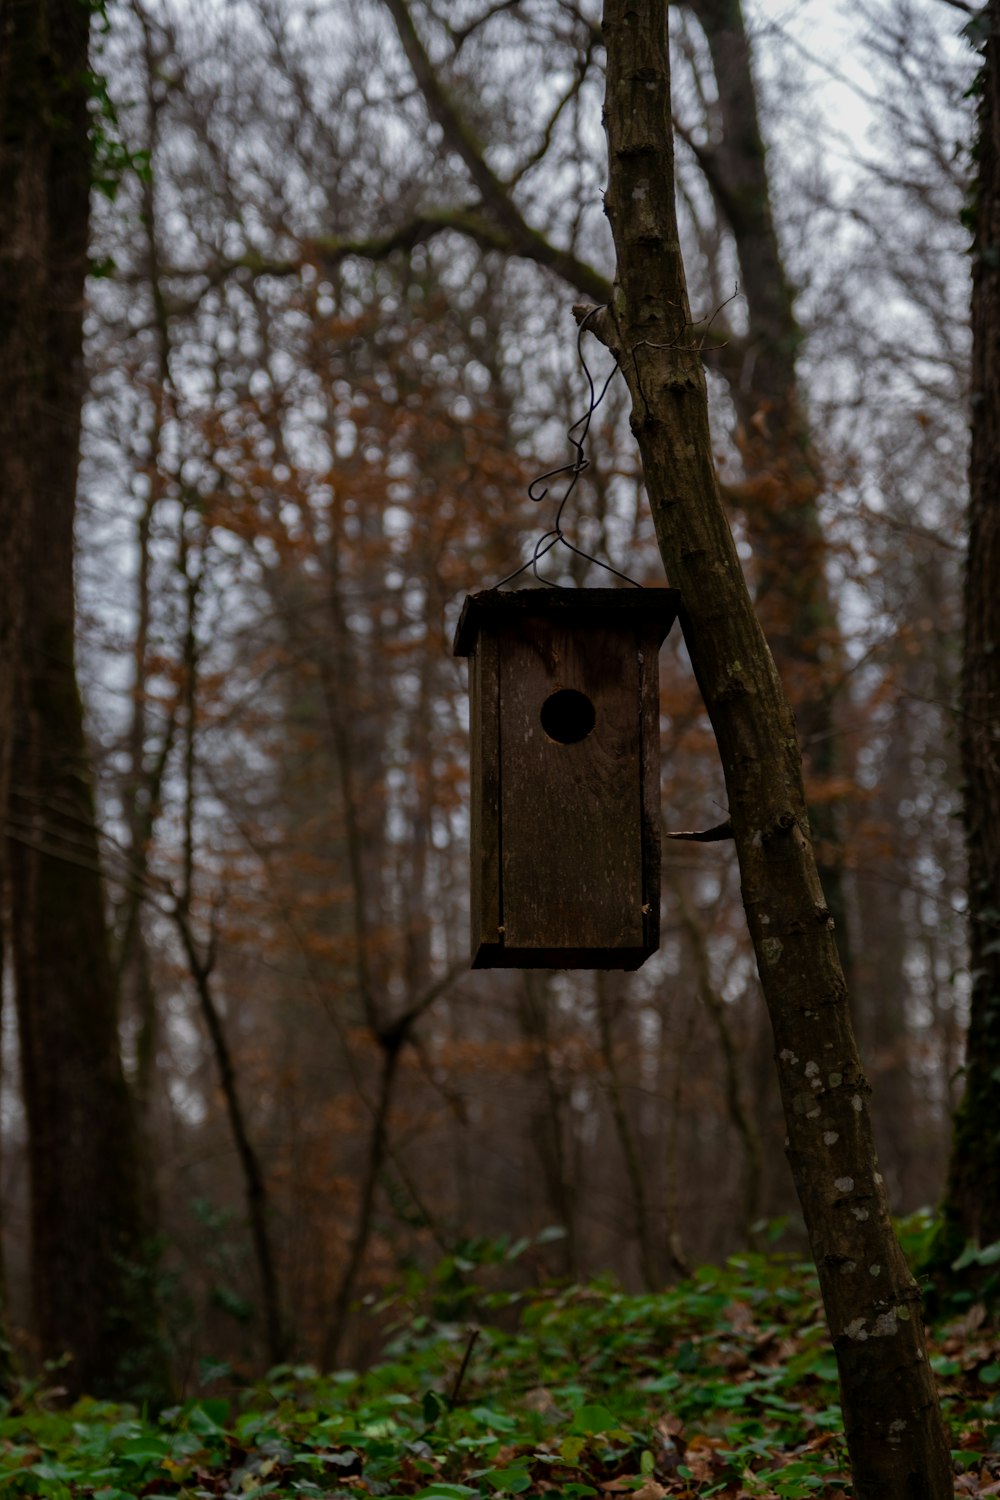 a birdhouse hanging from a tree in the woods